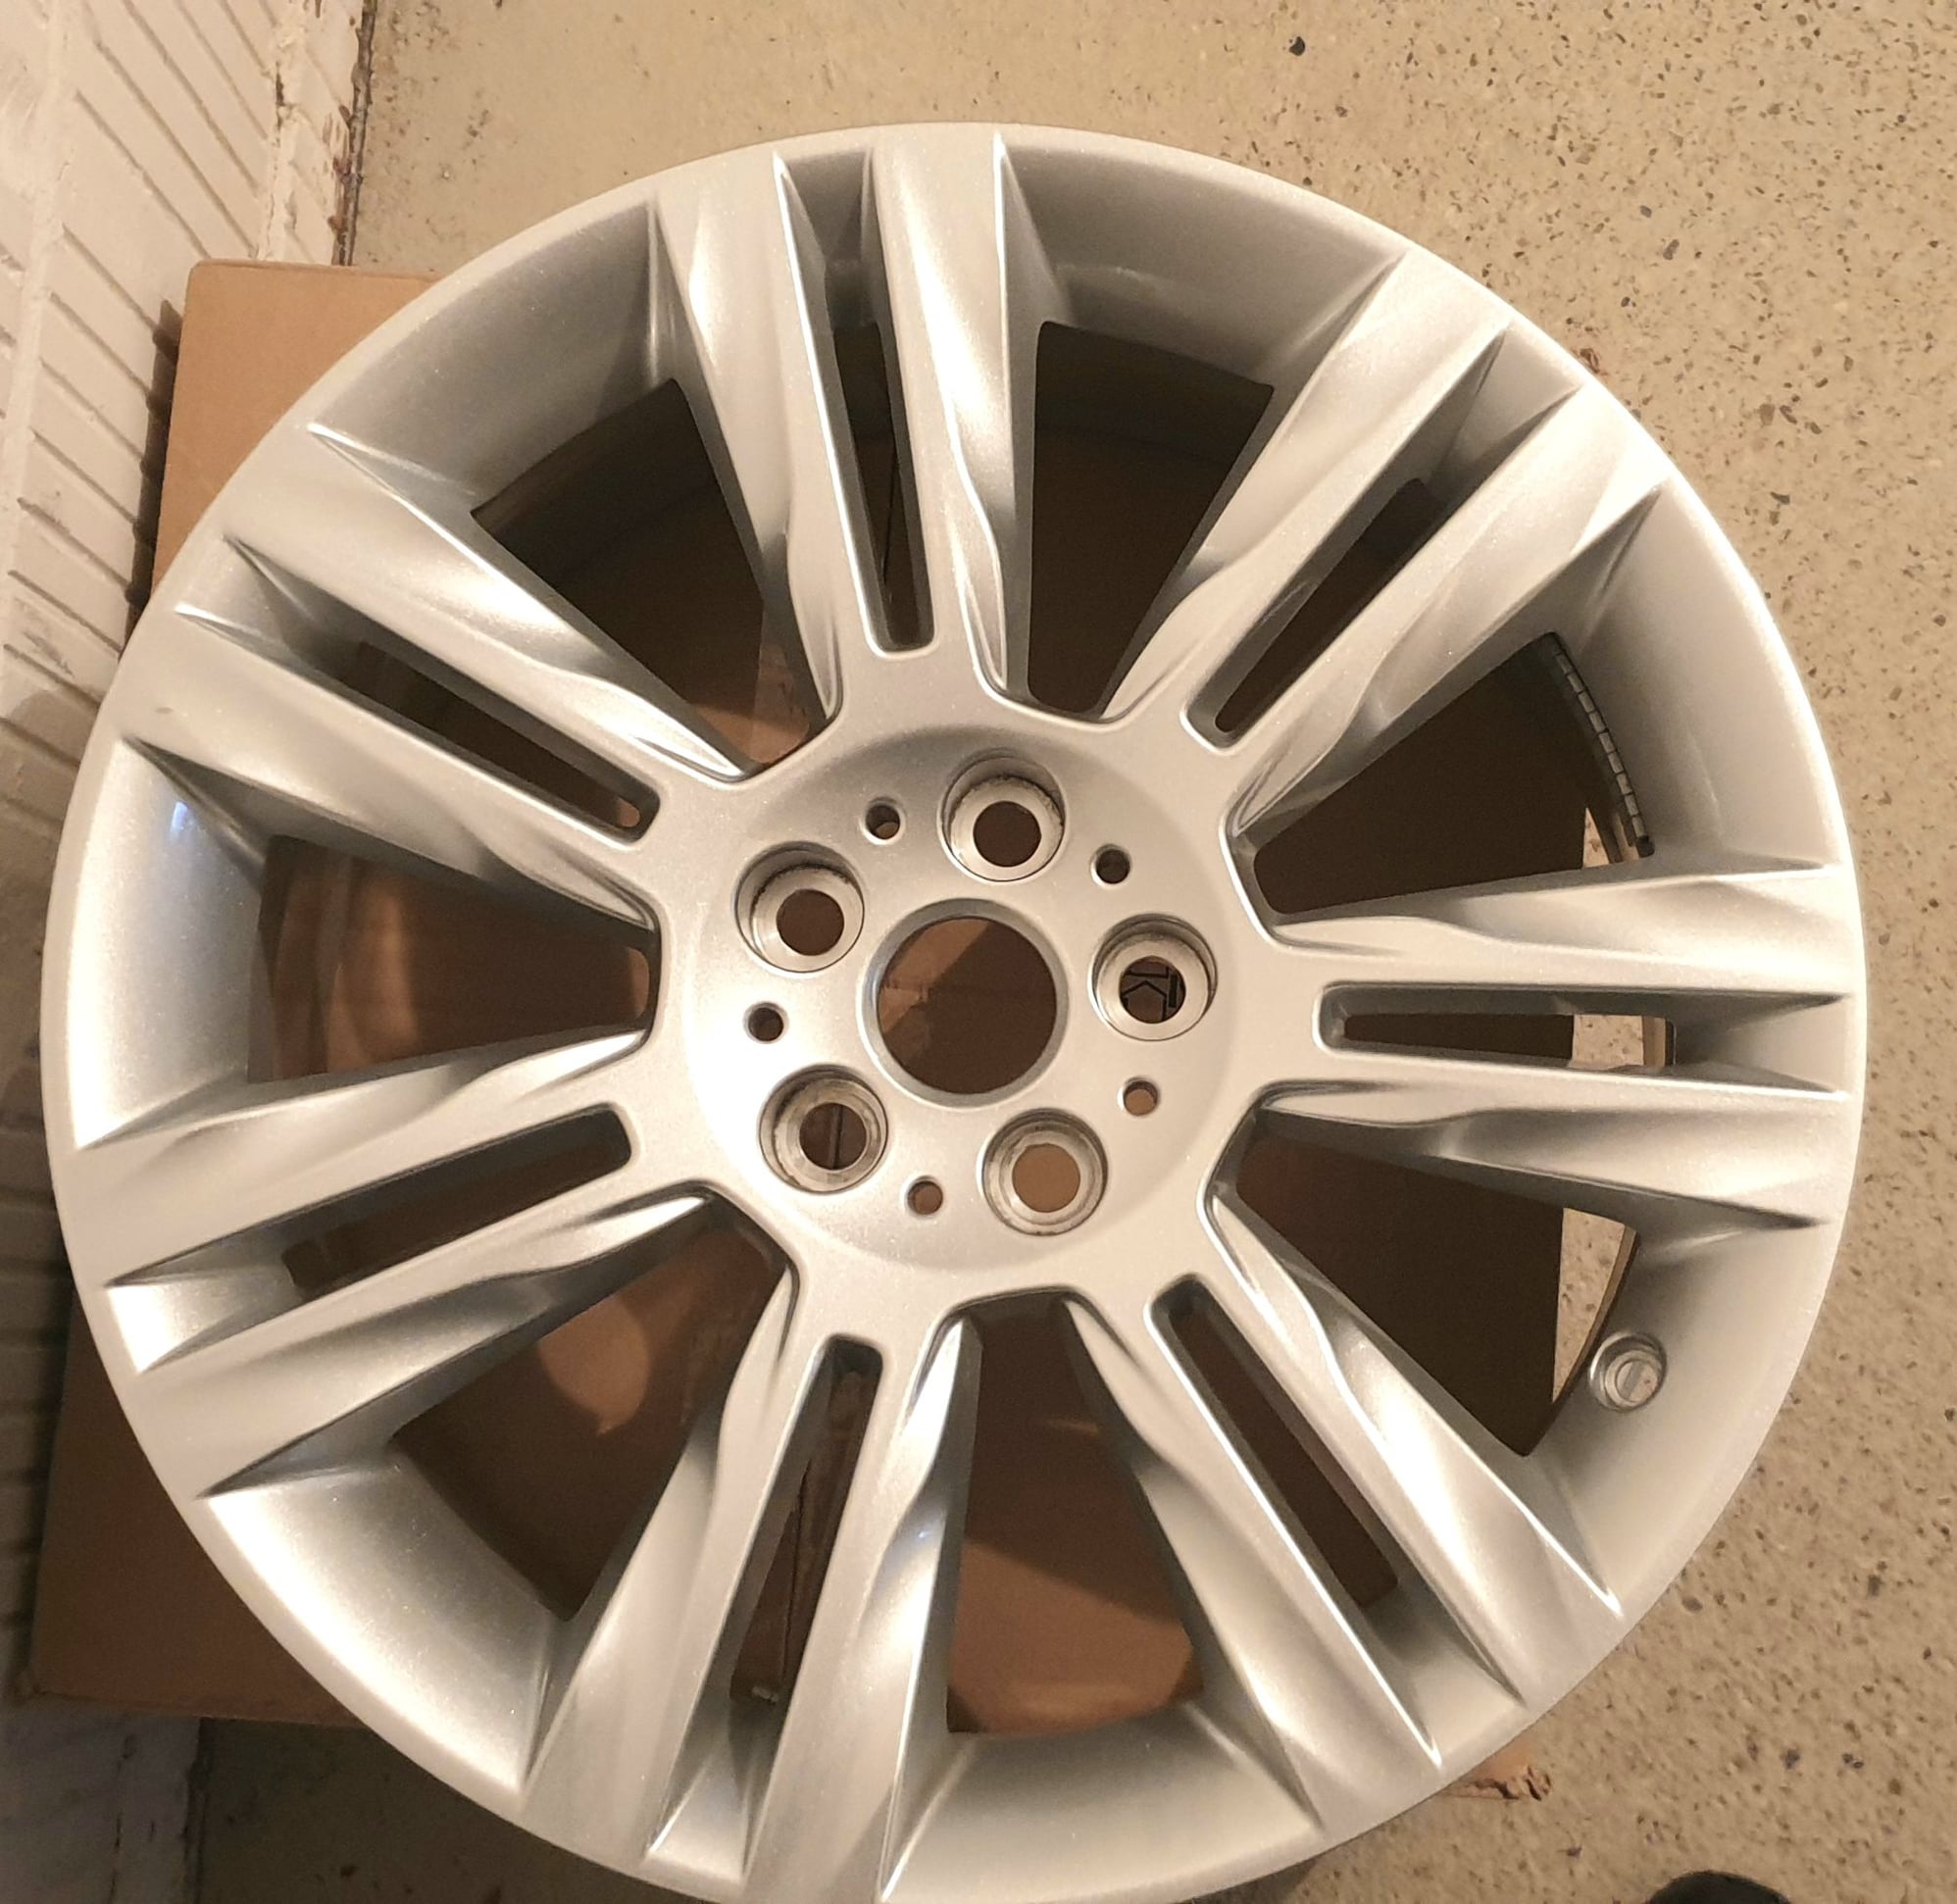 Wheels and Tires/Axles - Chalice 18" alloy rim - Used - 2016 to 2020 Jaguar XF - Kaufungen, Germany